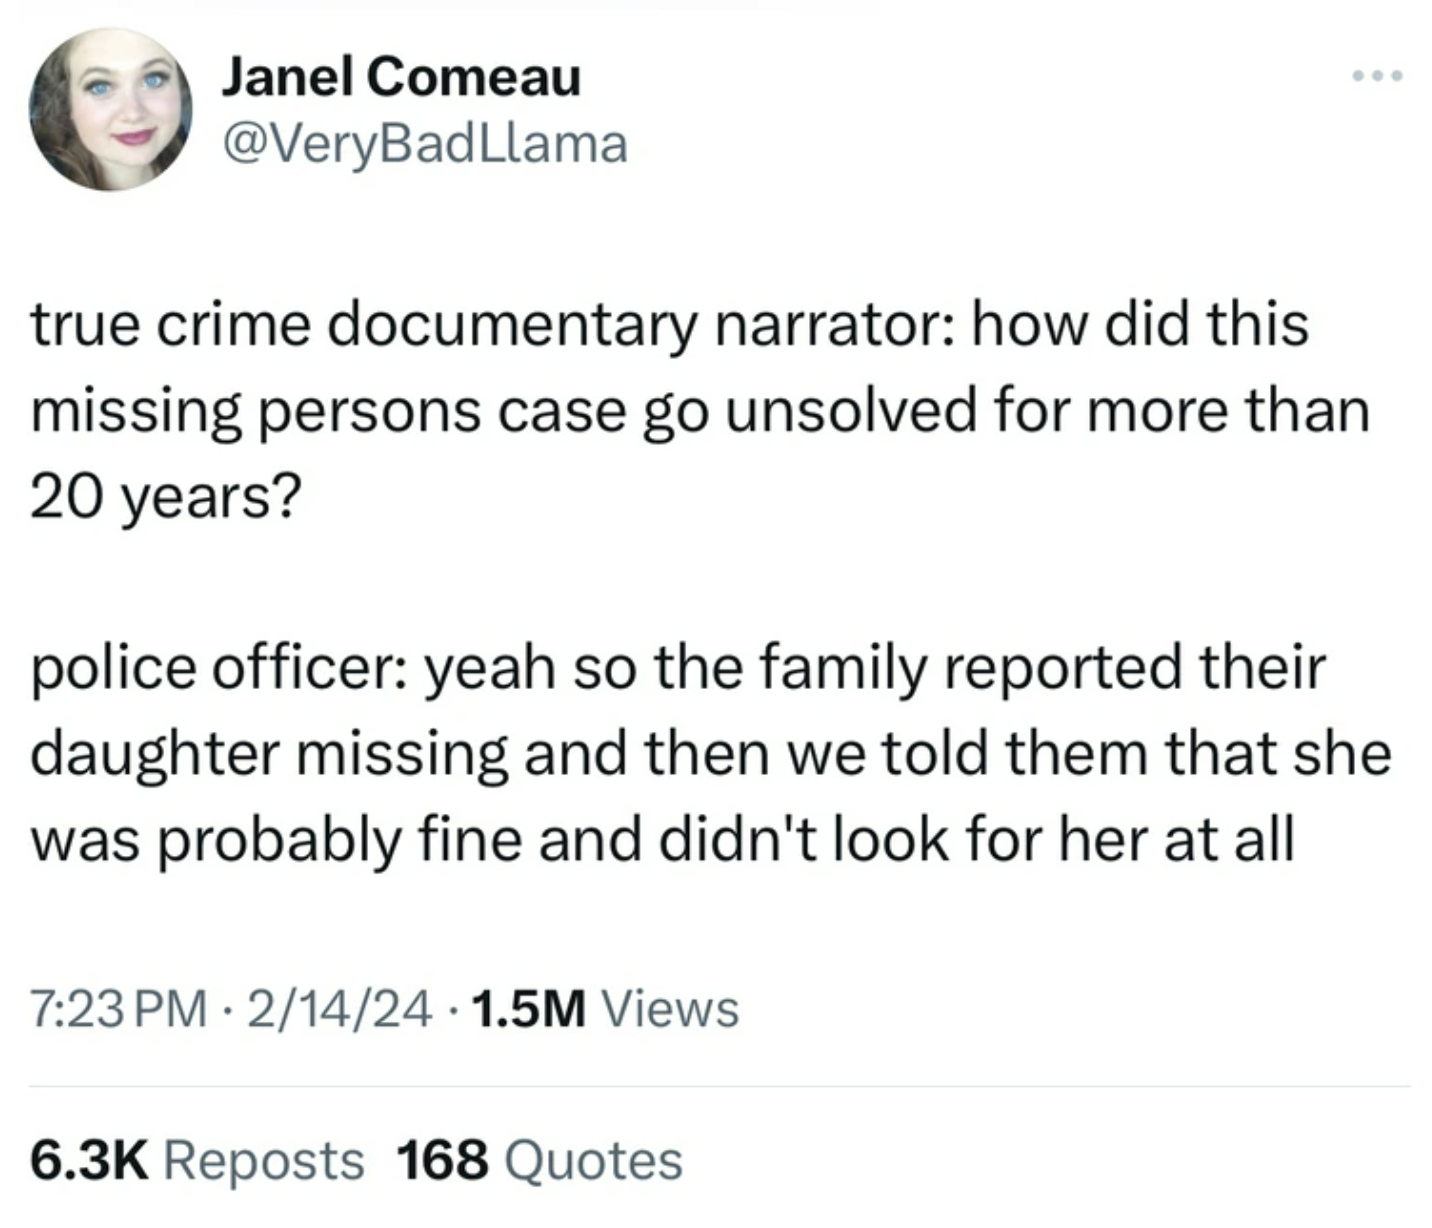 screenshot - Janel Comeau true crime documentary narrator how did this missing persons case go unsolved for more than 20 years? police officer yeah so the family reported their daughter missing and then we told them that she was probably fine and didn't l